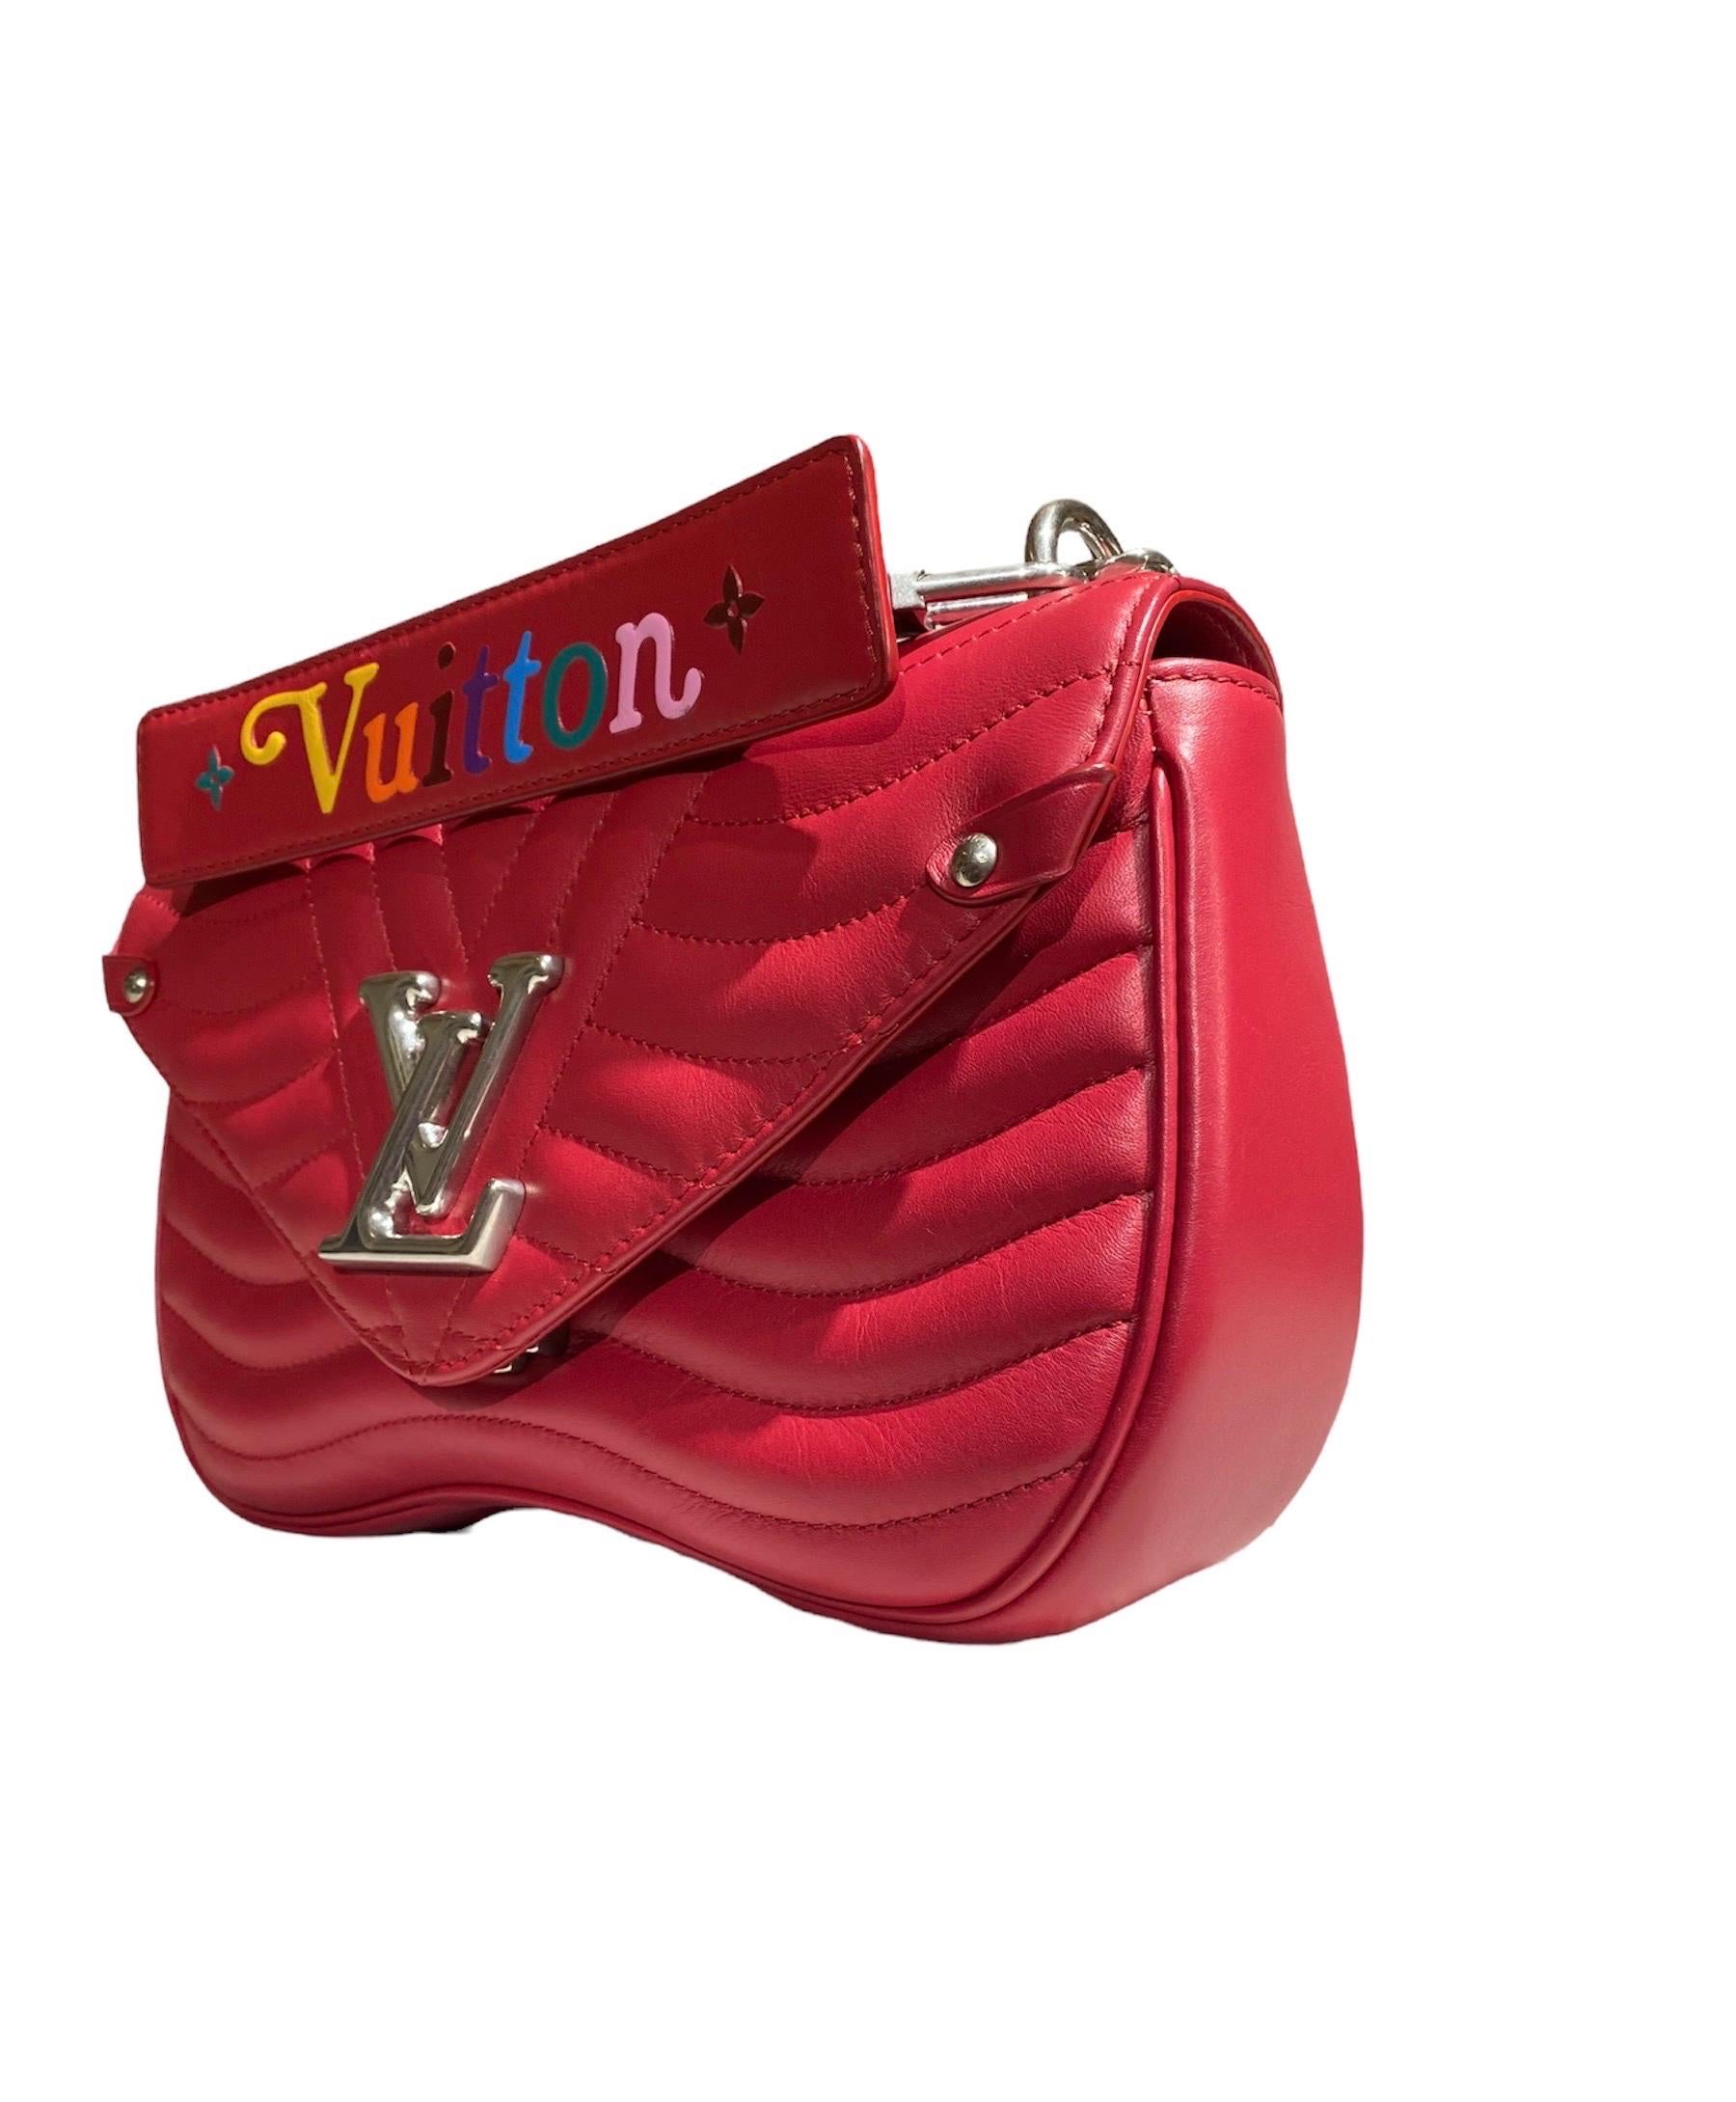 Louis Vuitton ‘new wave’ bag in red quilted leather and silver hardware.

Equipped with a sliding chain shoulder strap.

Closure with interlocking front flap. Internally capacious for the necessary.

It is in excellent condition.

Year of production